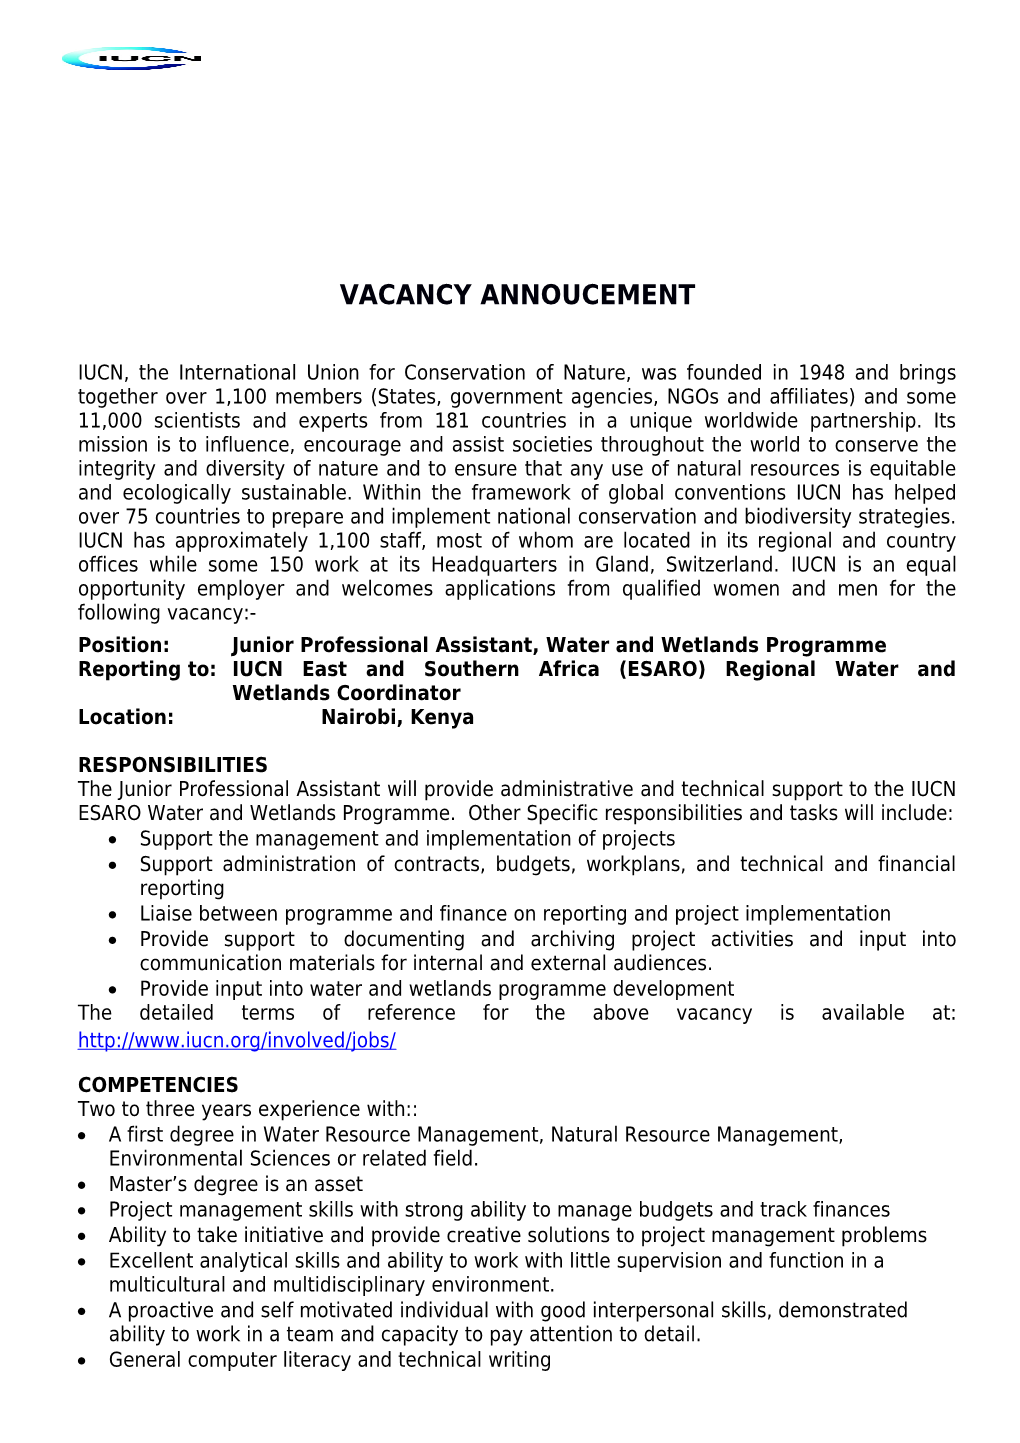 Position:Junior Professional Assistant, Water and Wetlands Programme